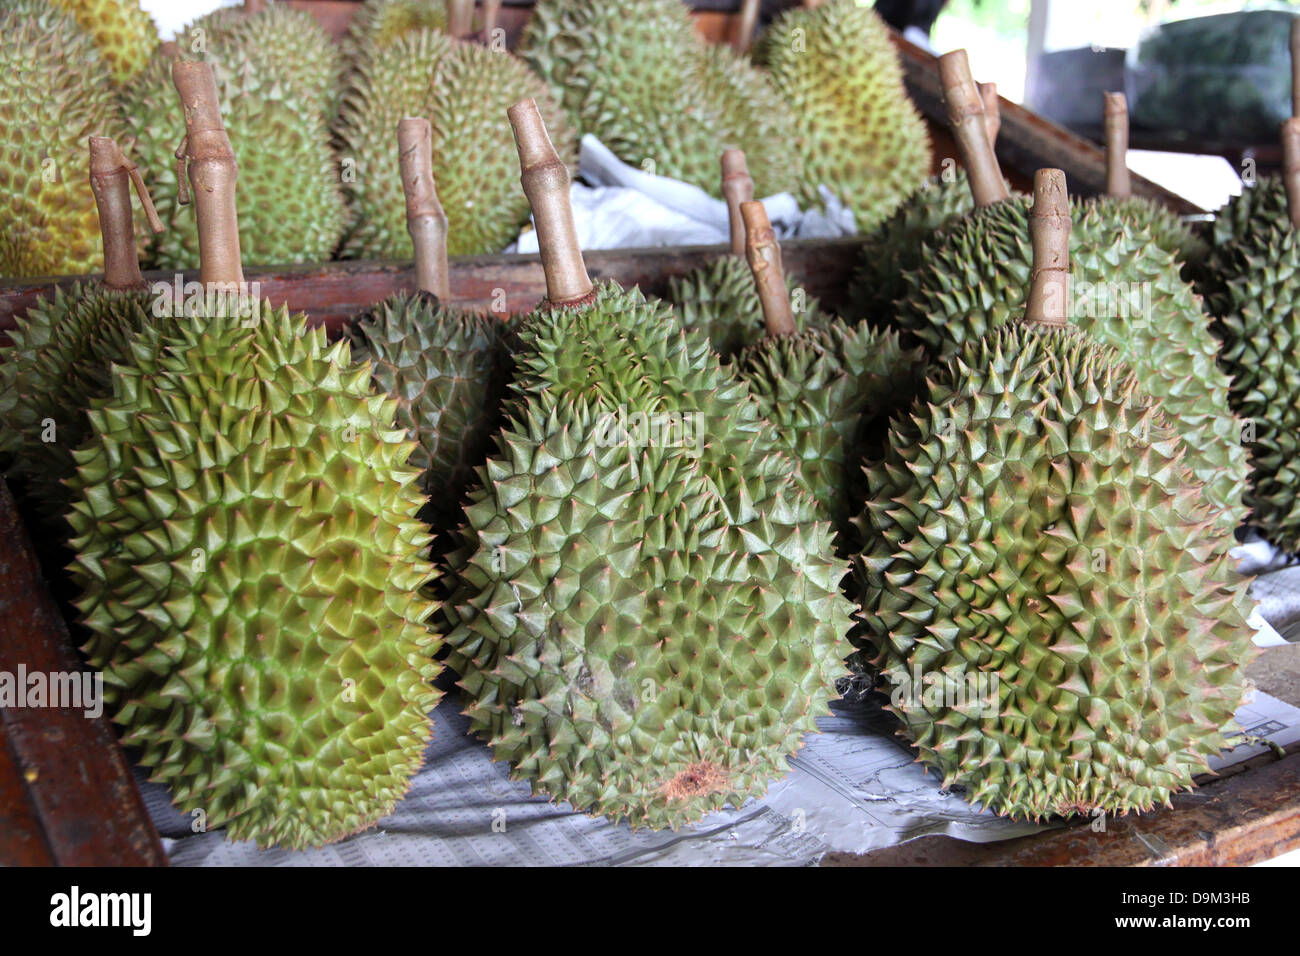 Durian from Thailand is Fruit with a strong smell. Stock Photo